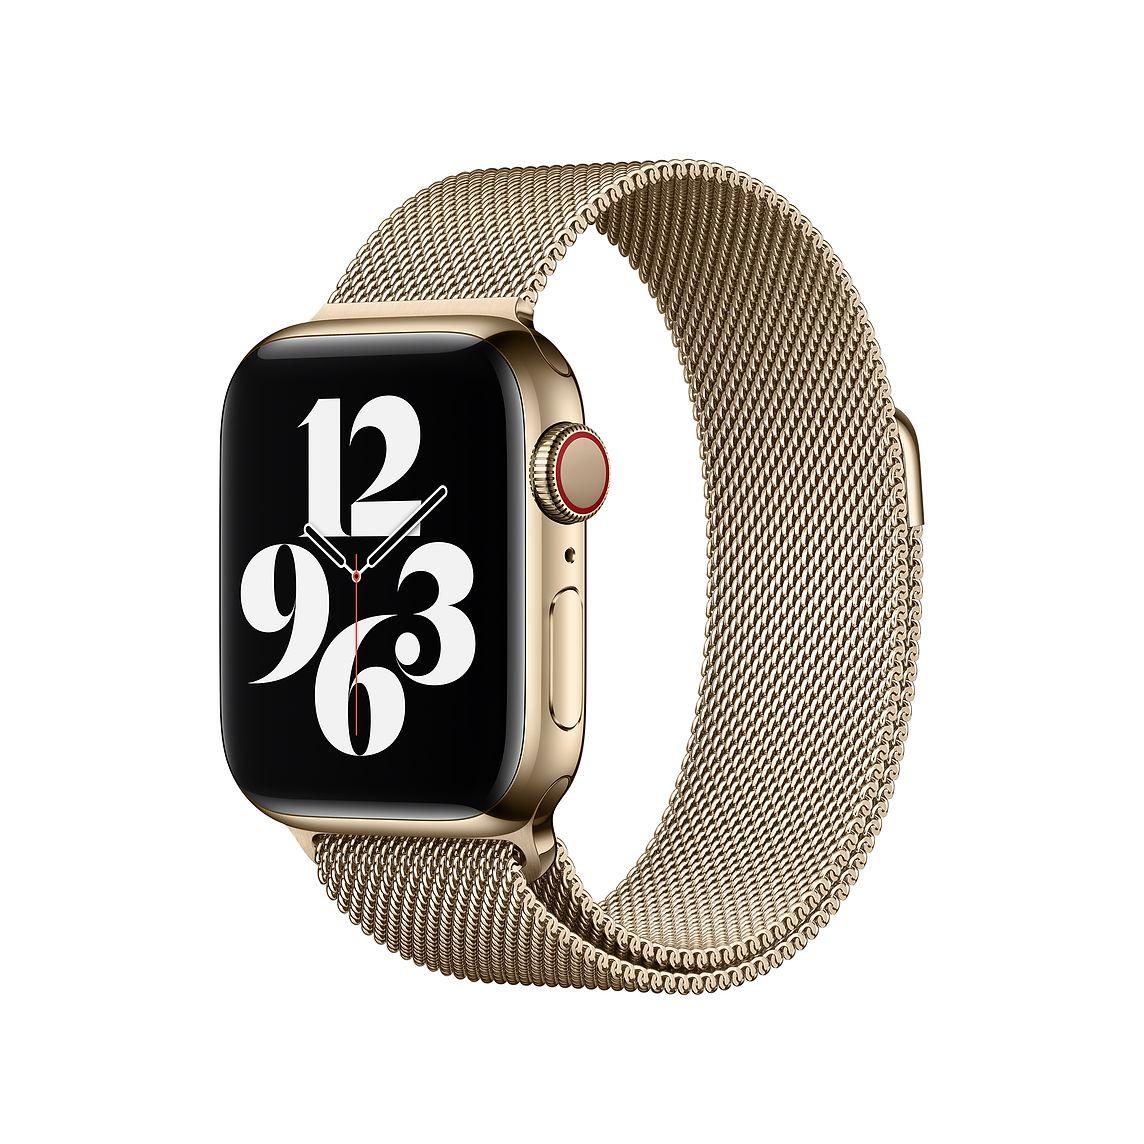 FAQ | Will My Old Apple Watch Bands Fit the New Apple Watch Series 7? 